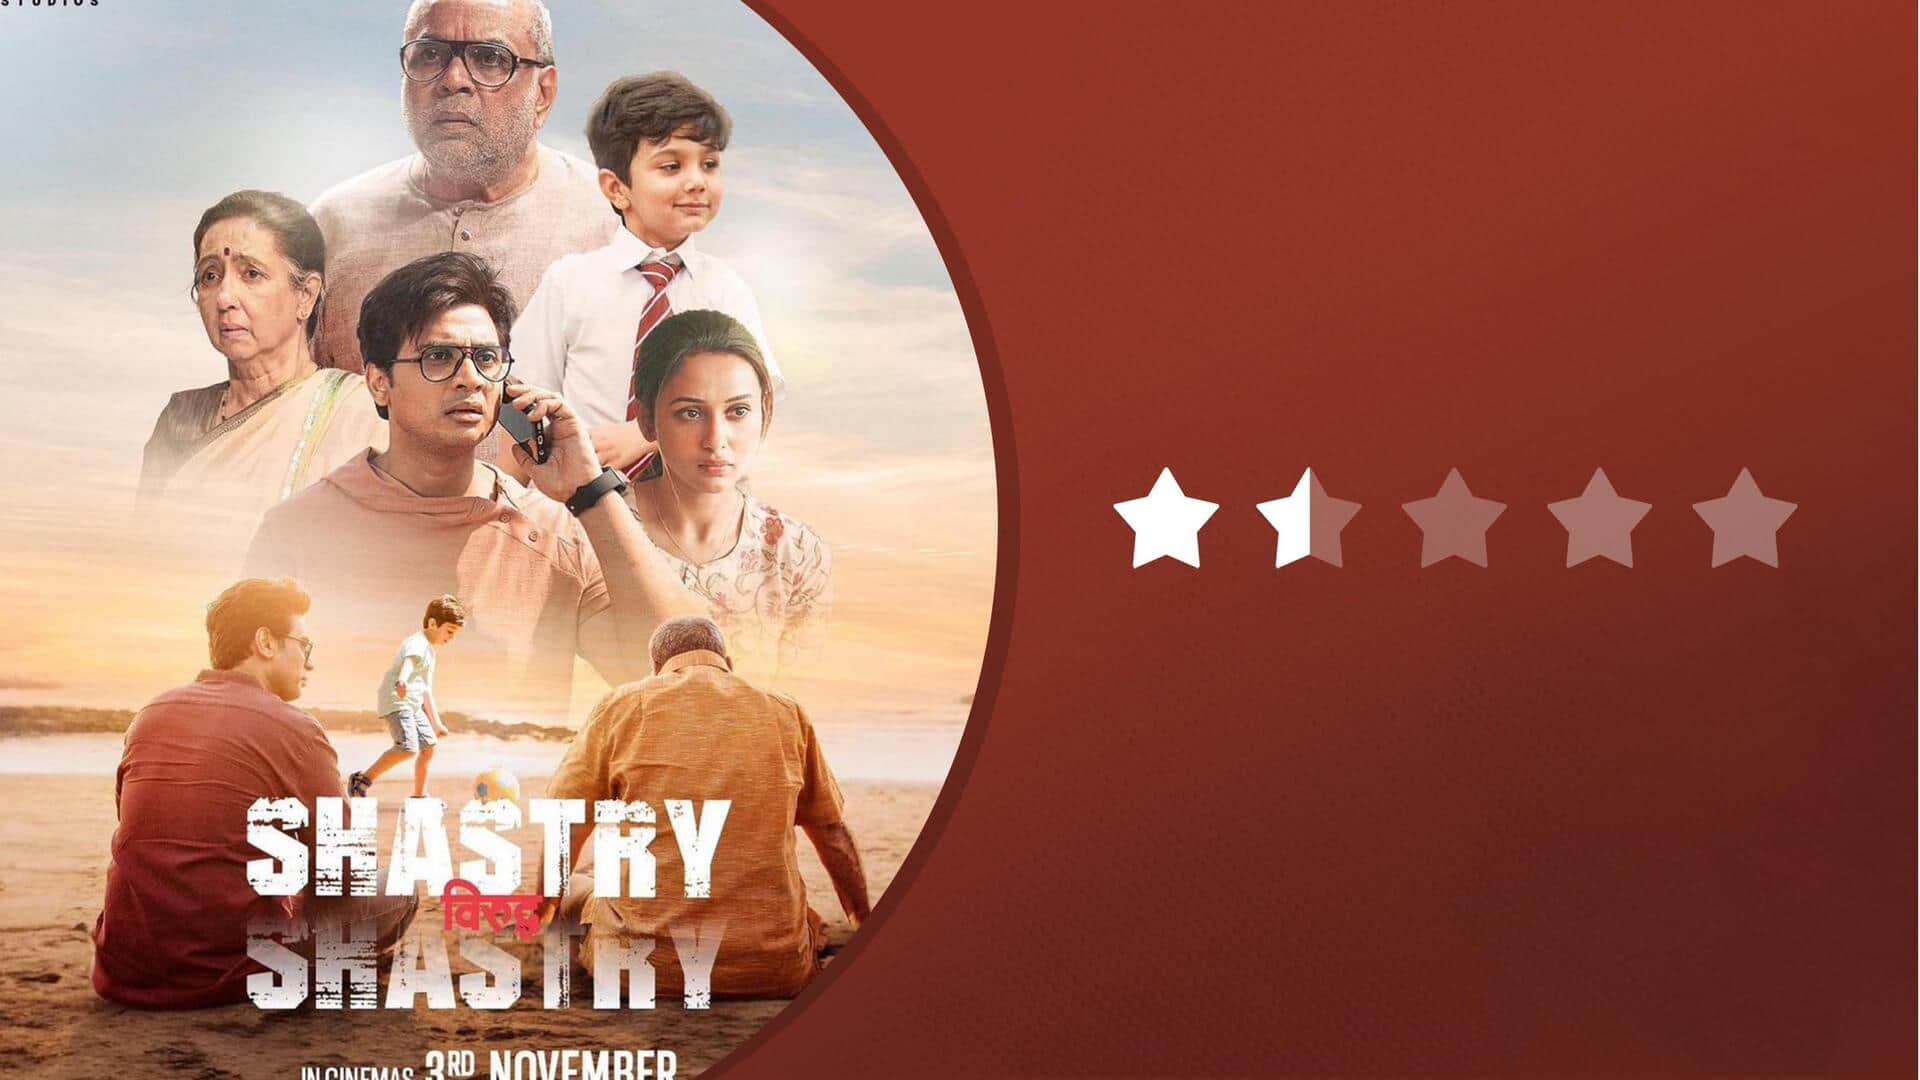 'Shastry Viruddh Shastry' review: Strong performances but predictable and overlong